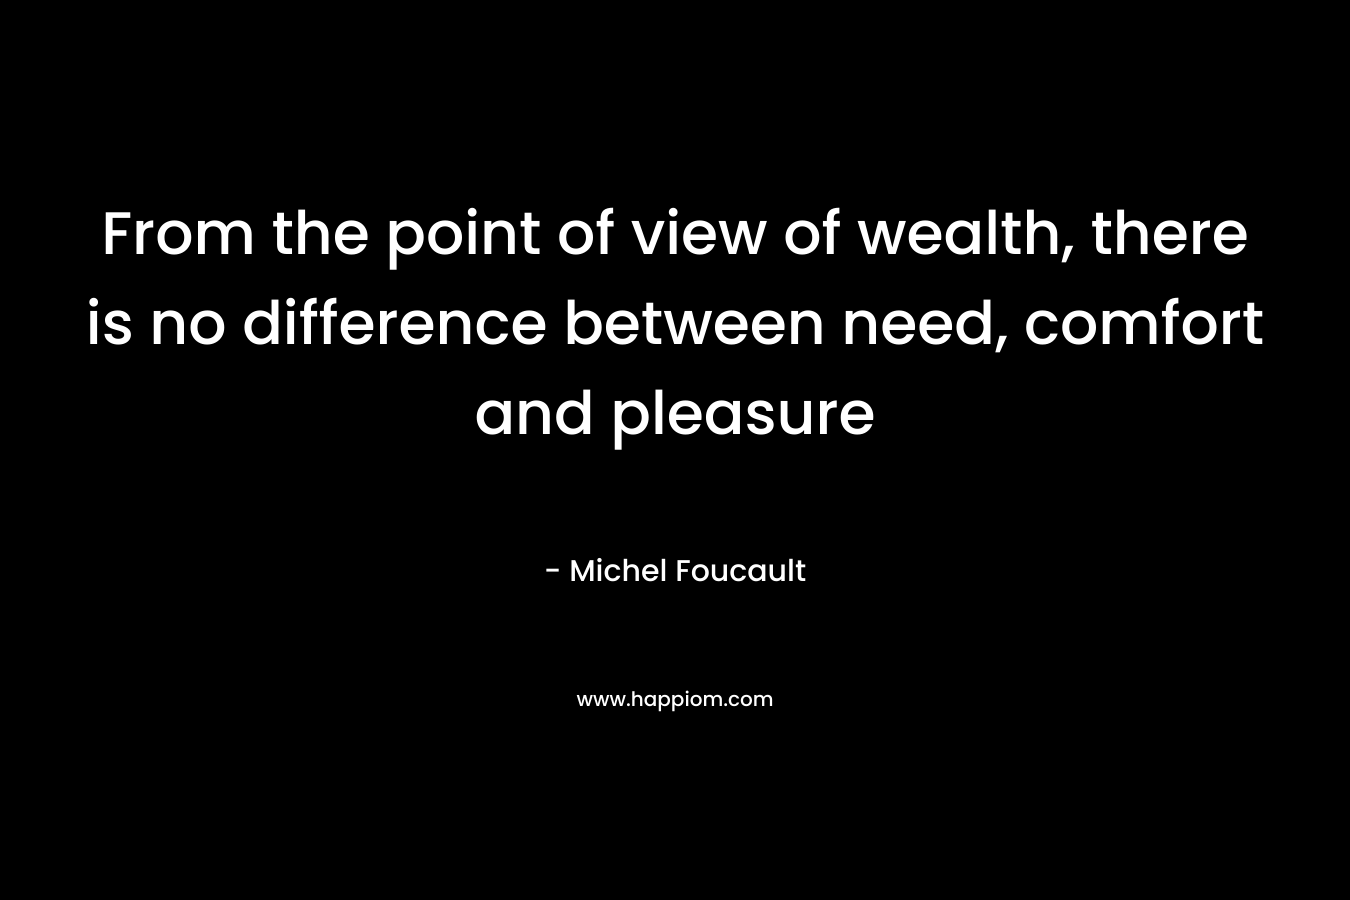 From the point of view of wealth, there is no difference between need, comfort and pleasure